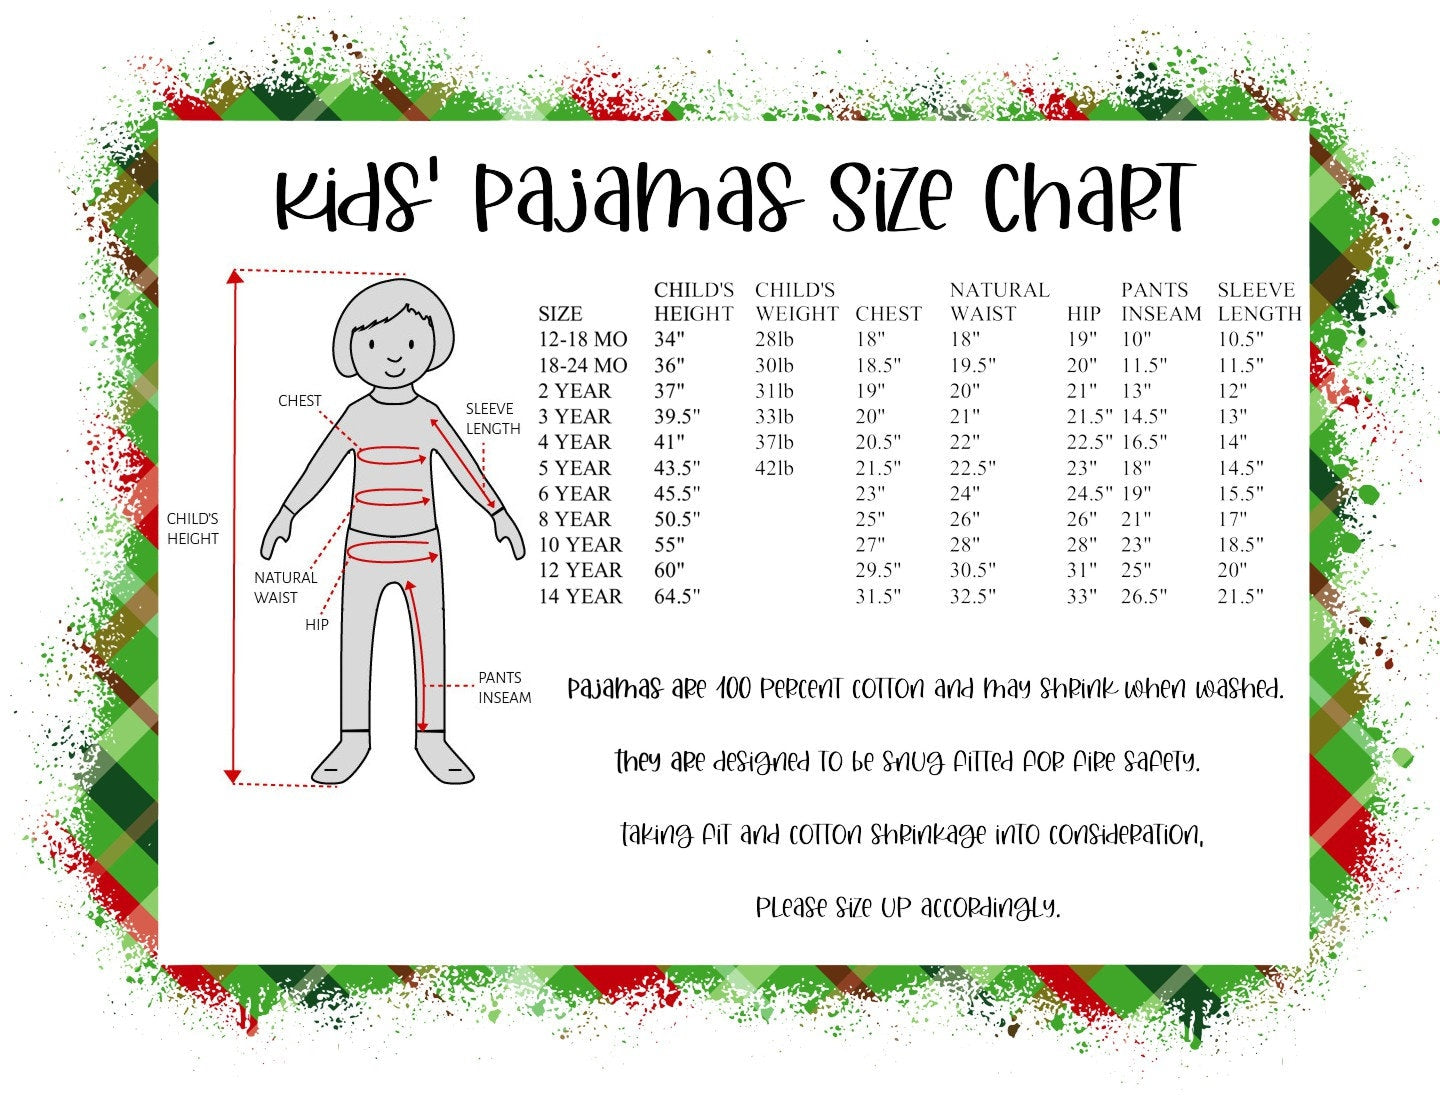 Personalized Gingerbread Family Christmas Pajamas Green Top Striped - matching christmas pjs -  women's christmas jammies